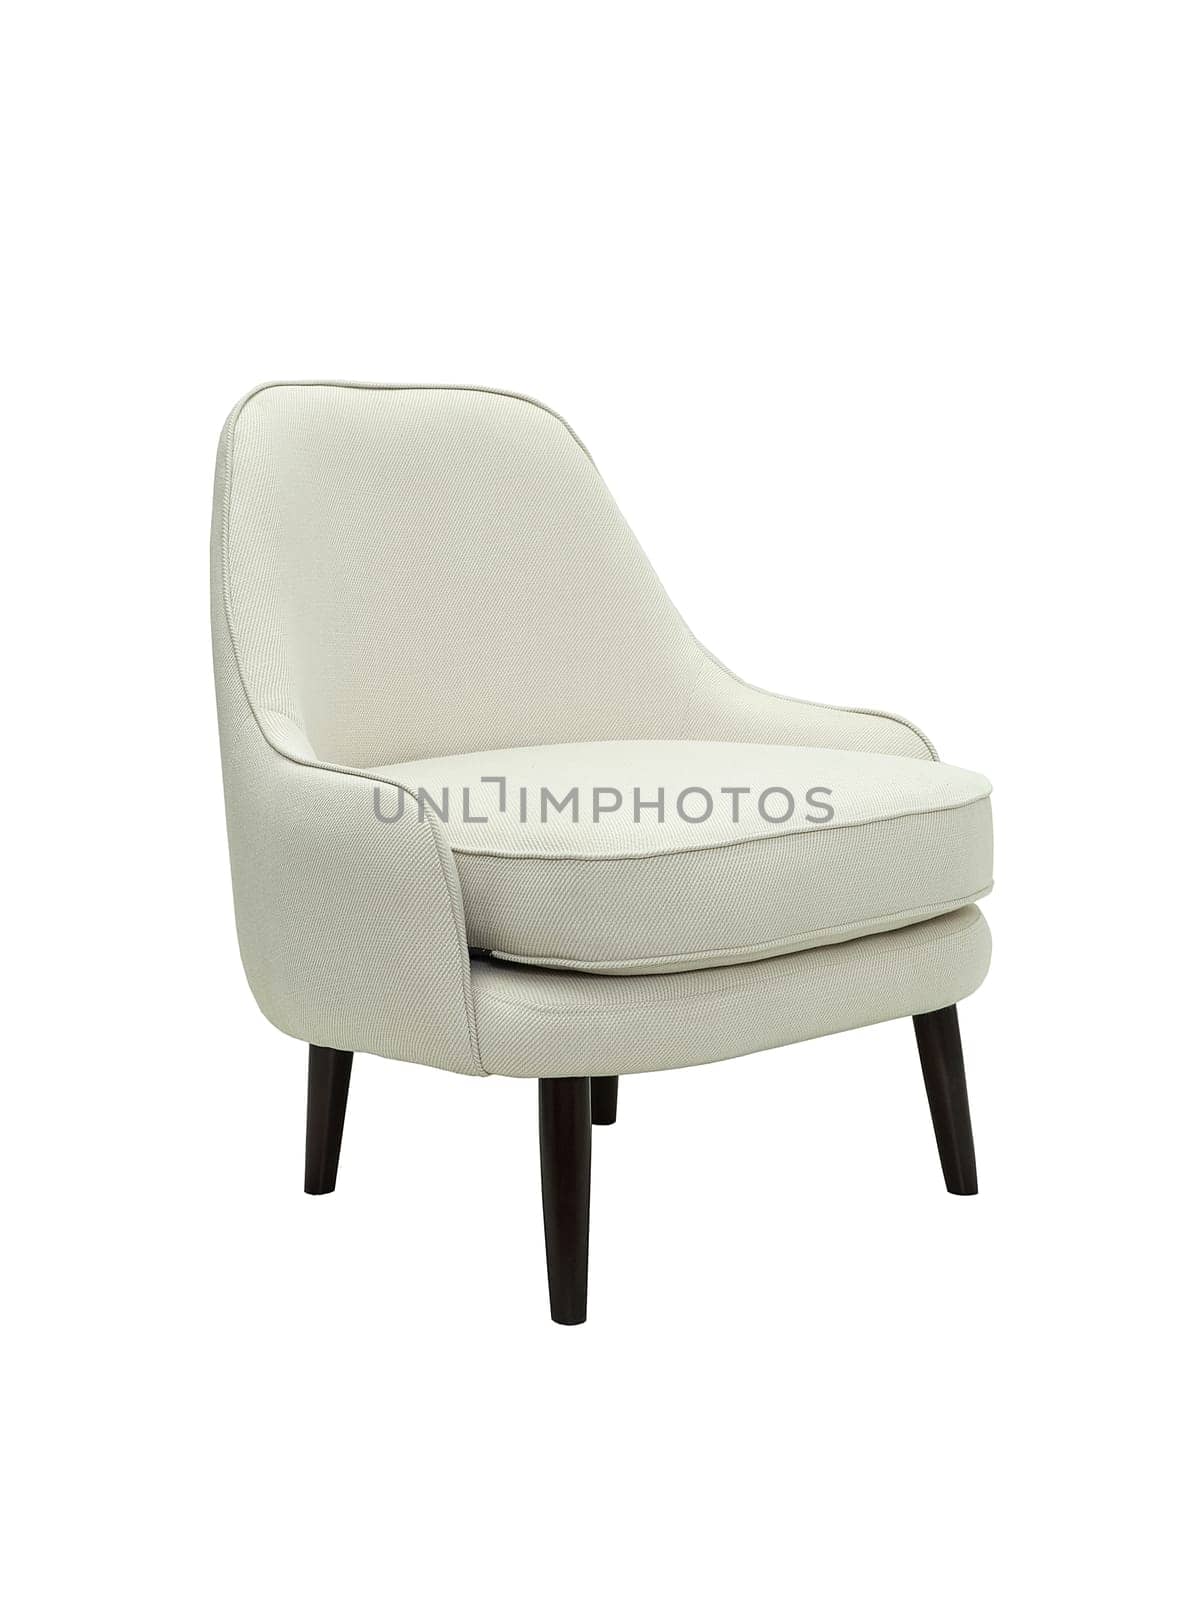 modern fabric armchair with wooden legs isolated on white background, side view.